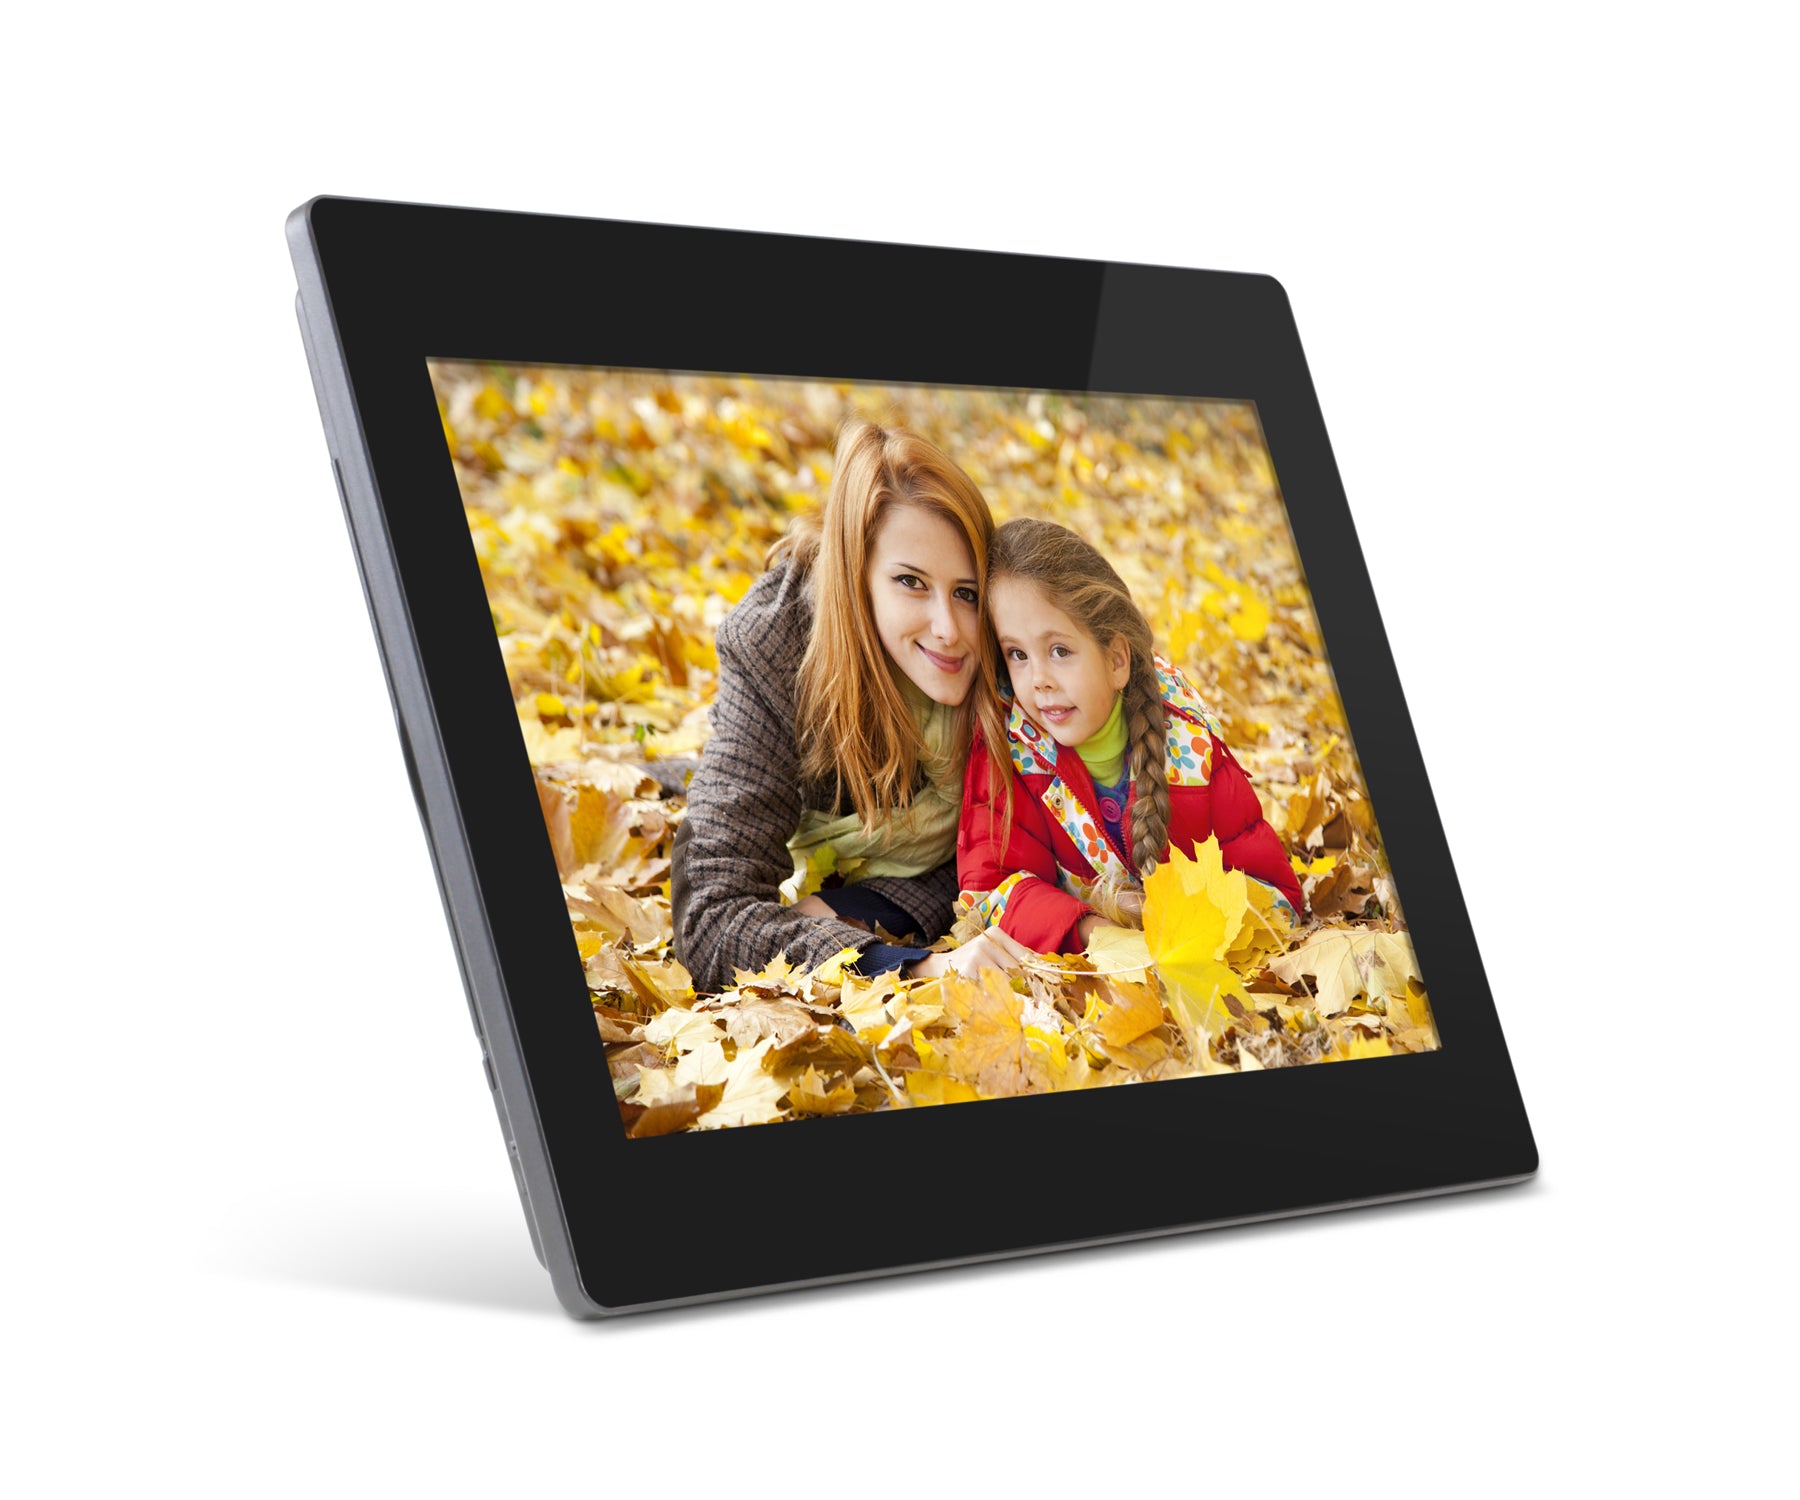 Kodak 10 Digital Picture Frame with Wi-Fi and Multi-Touch Display (Pink)